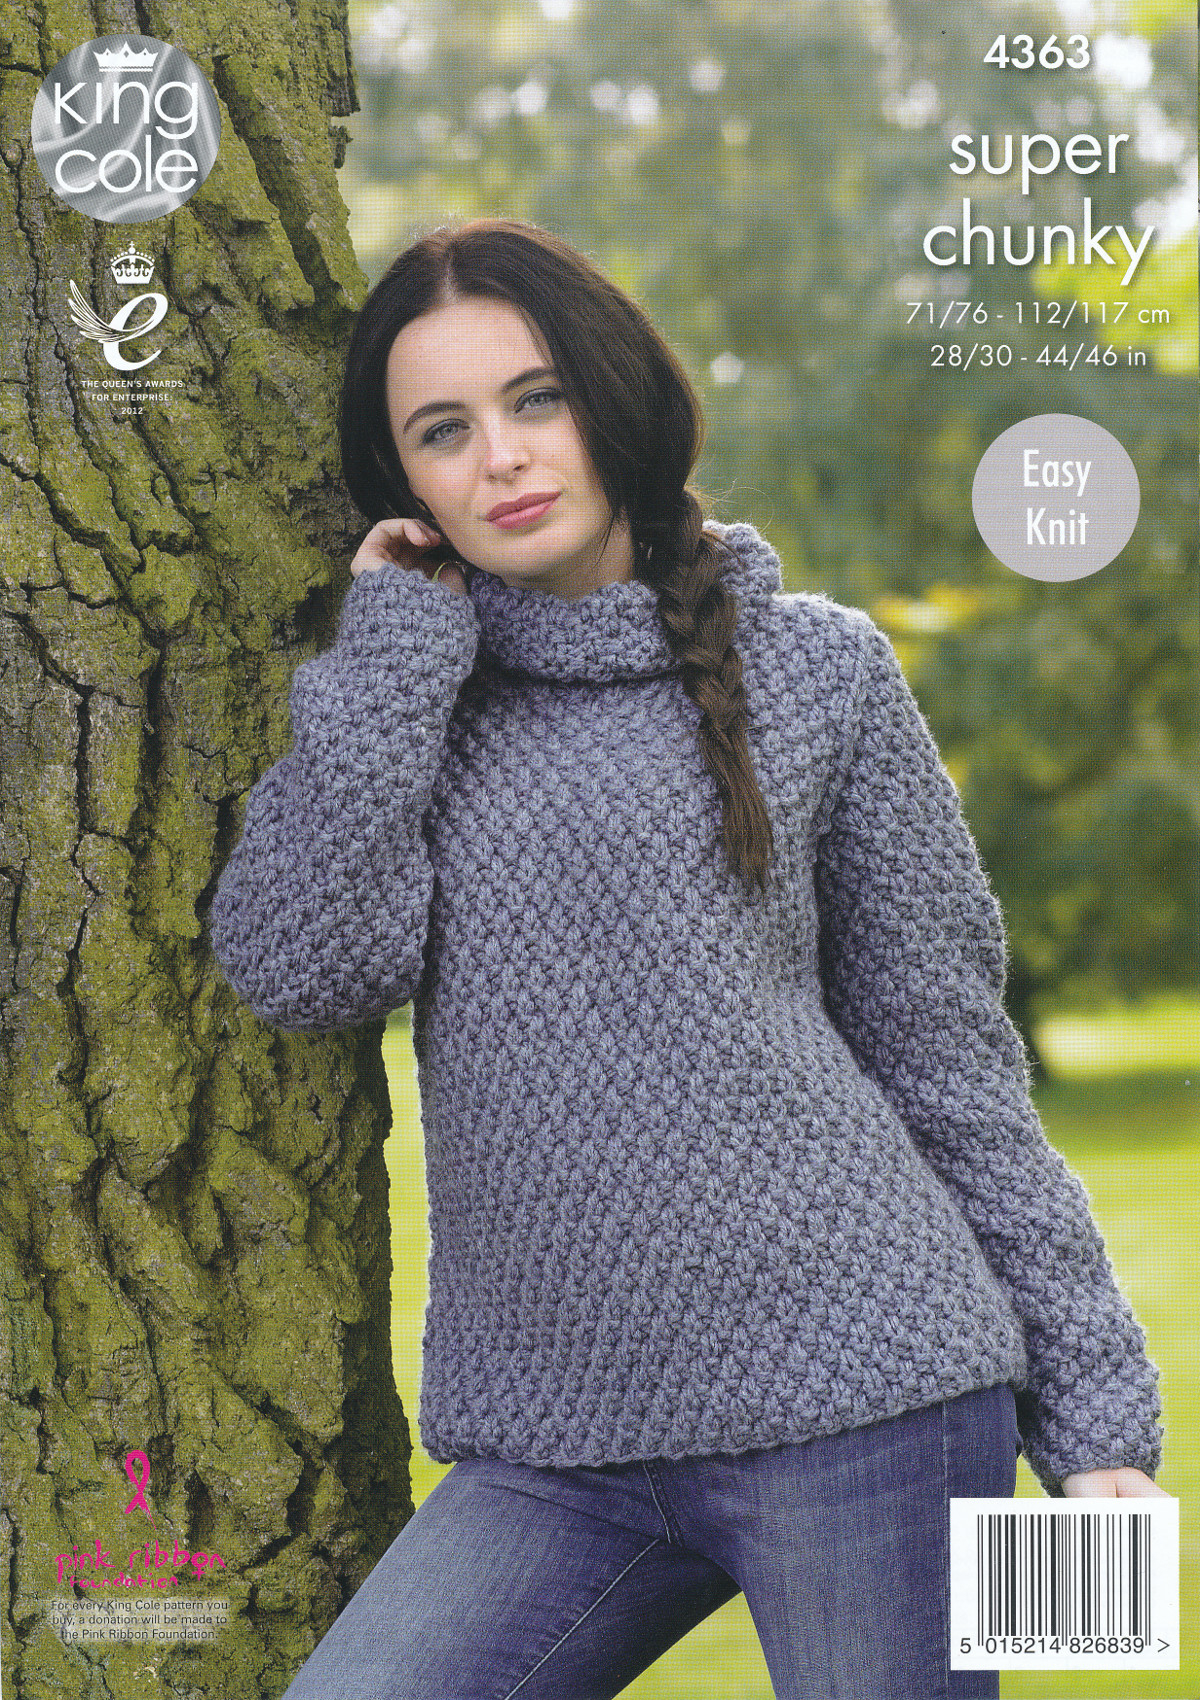 Knit Sweaters Patterns Details About Ladies Super Chunky Knitting Pattern King Cole Easy Knit Sweater Jacket 4363